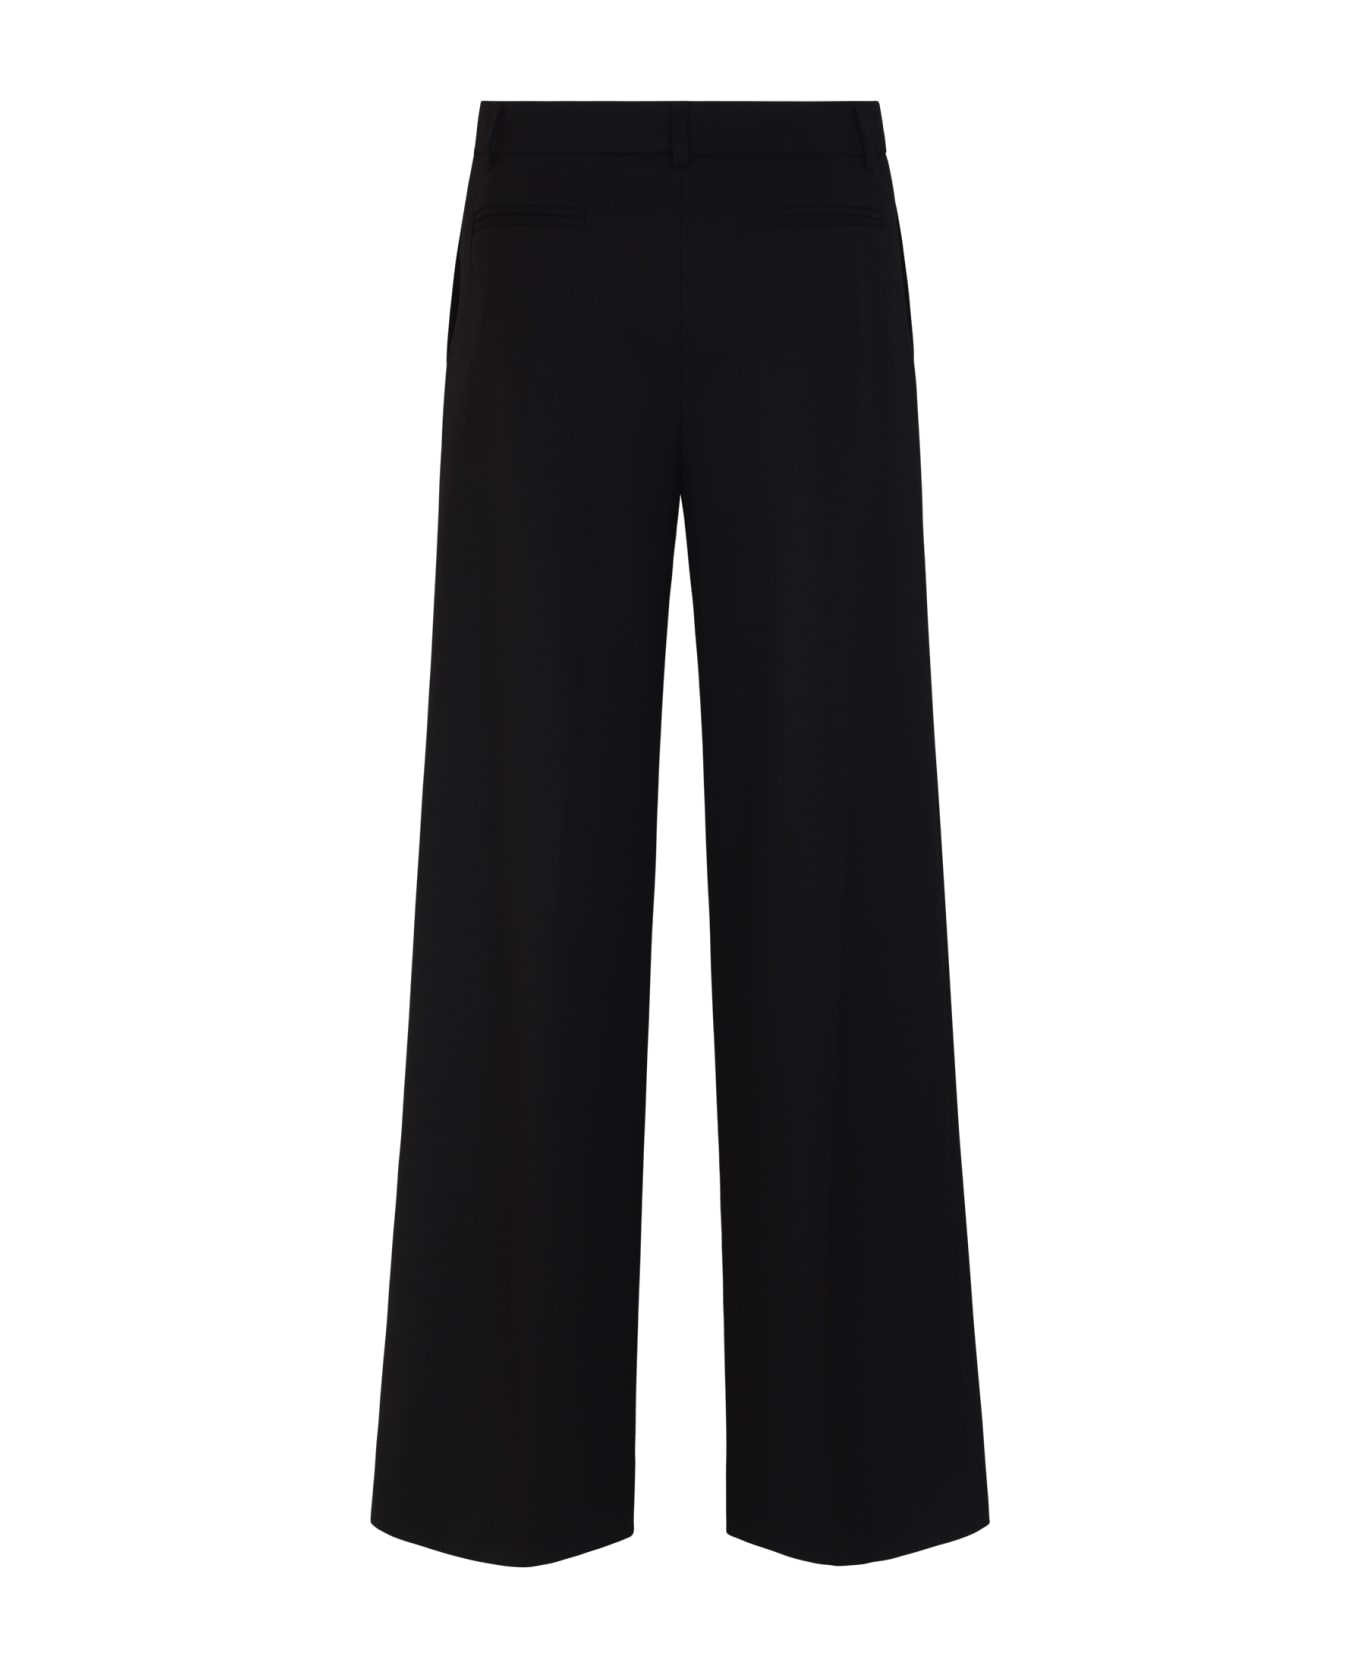 QL2 Straight Concealed Trousers - Black